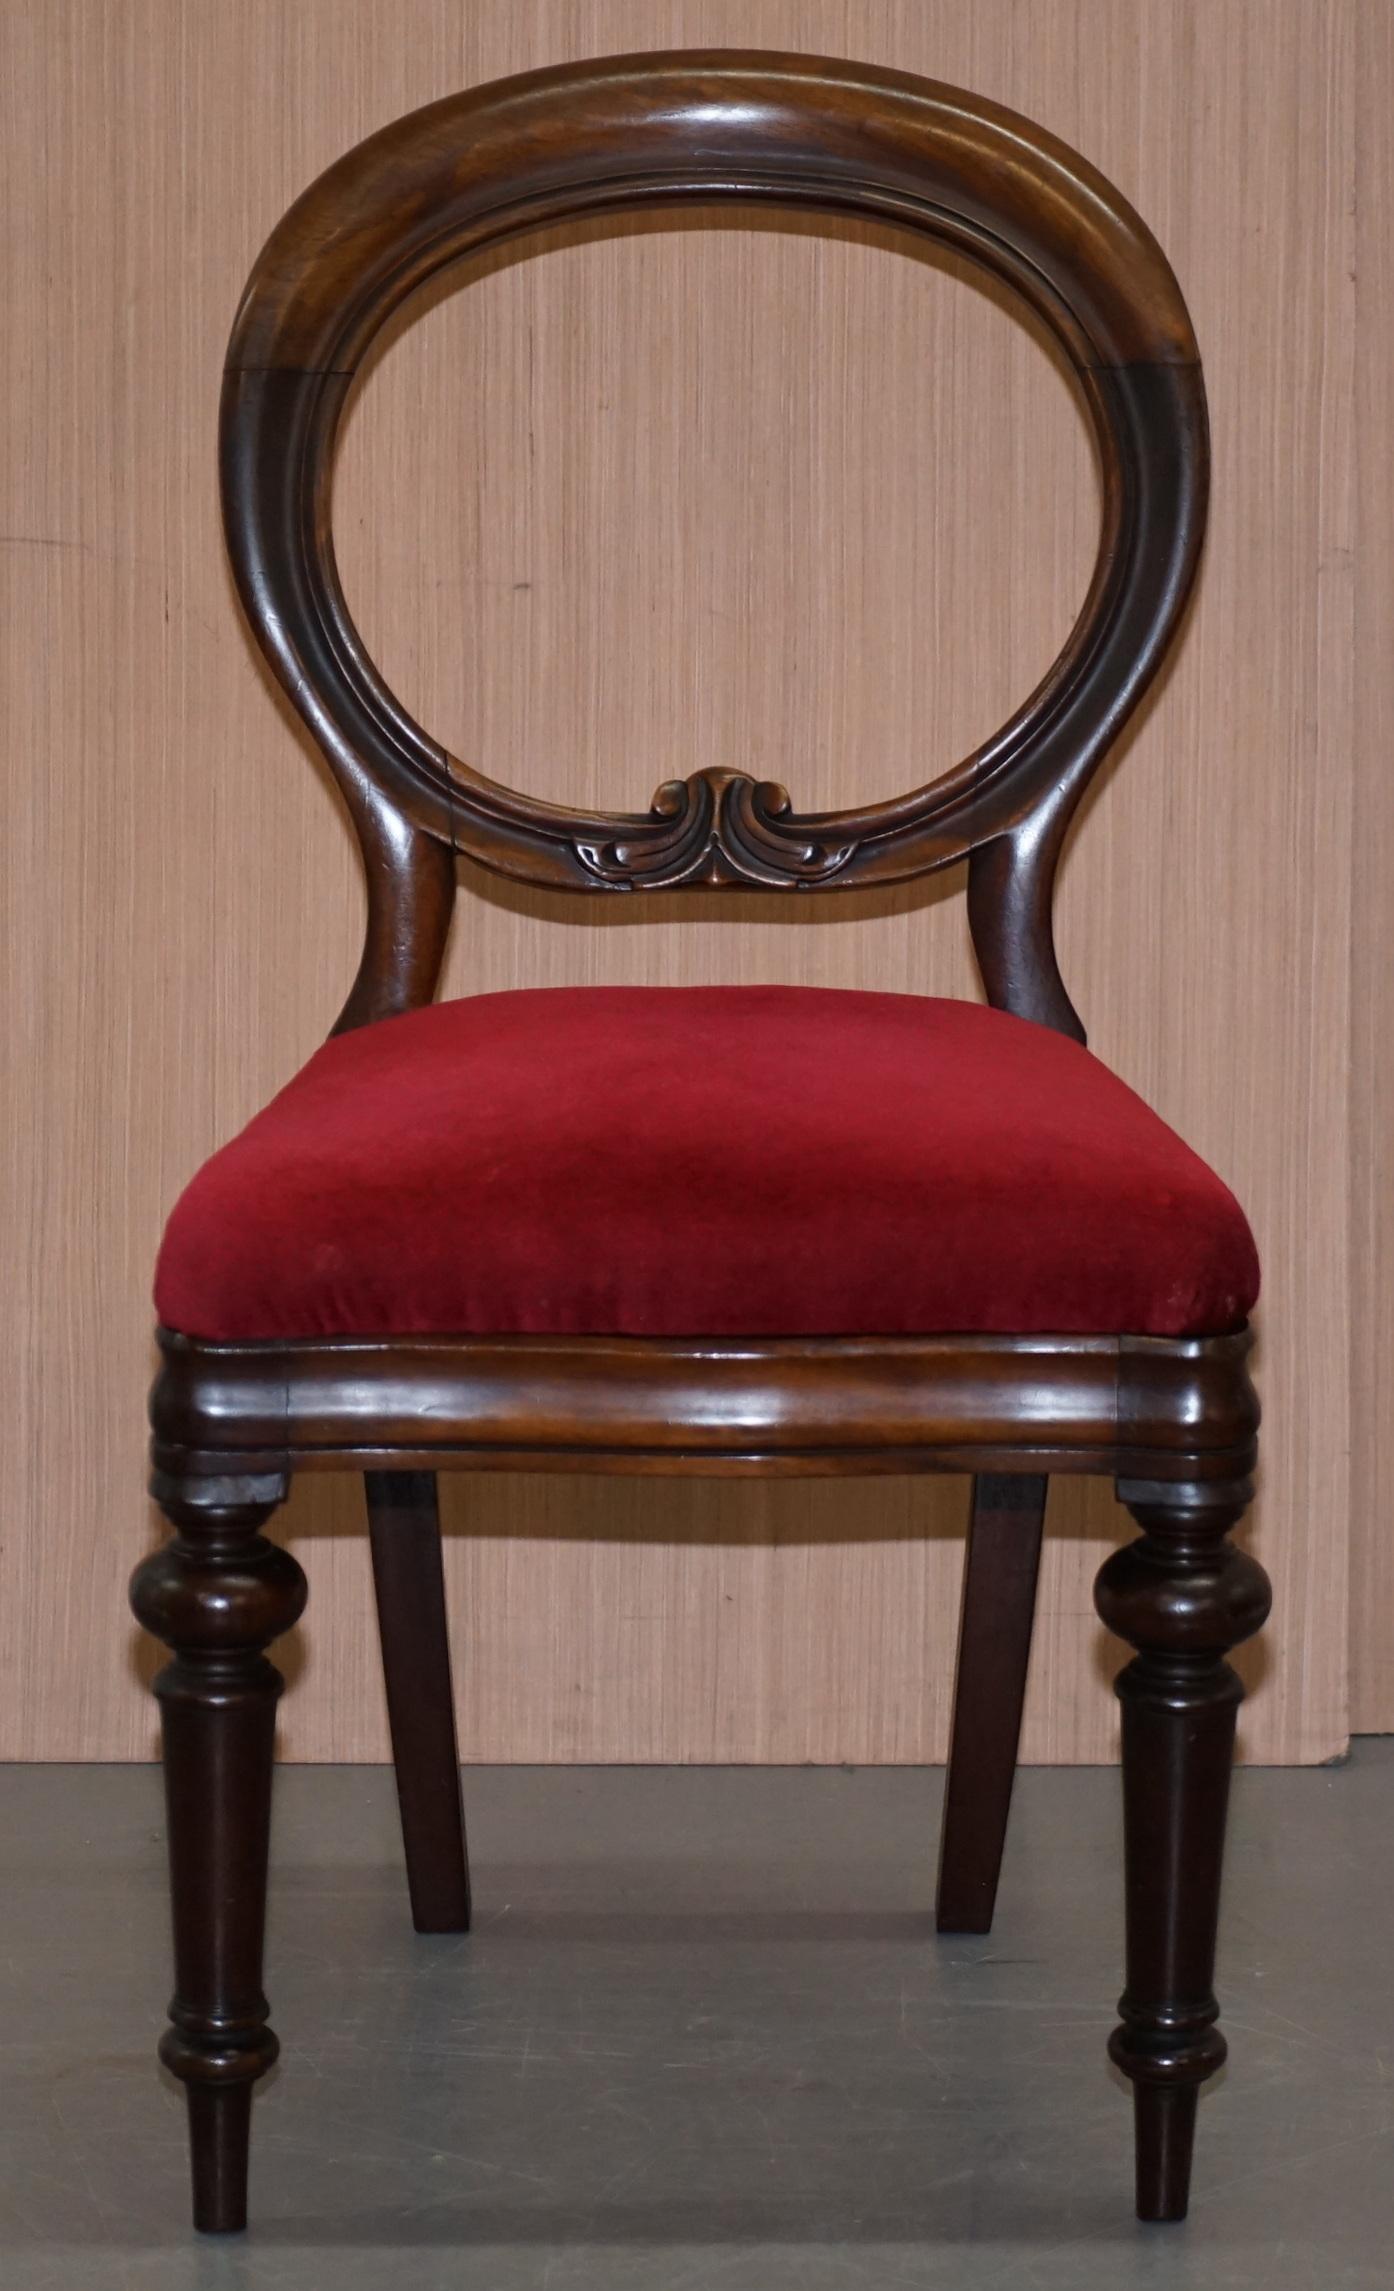 We are delighted to offer for sale this very nice medallion spoon back mahogany chair with velour upholstery 

A good looking and decorative piece, it is Edwardian so circa 1900-1910, the chair is ideally suited as a dressing table, desk or